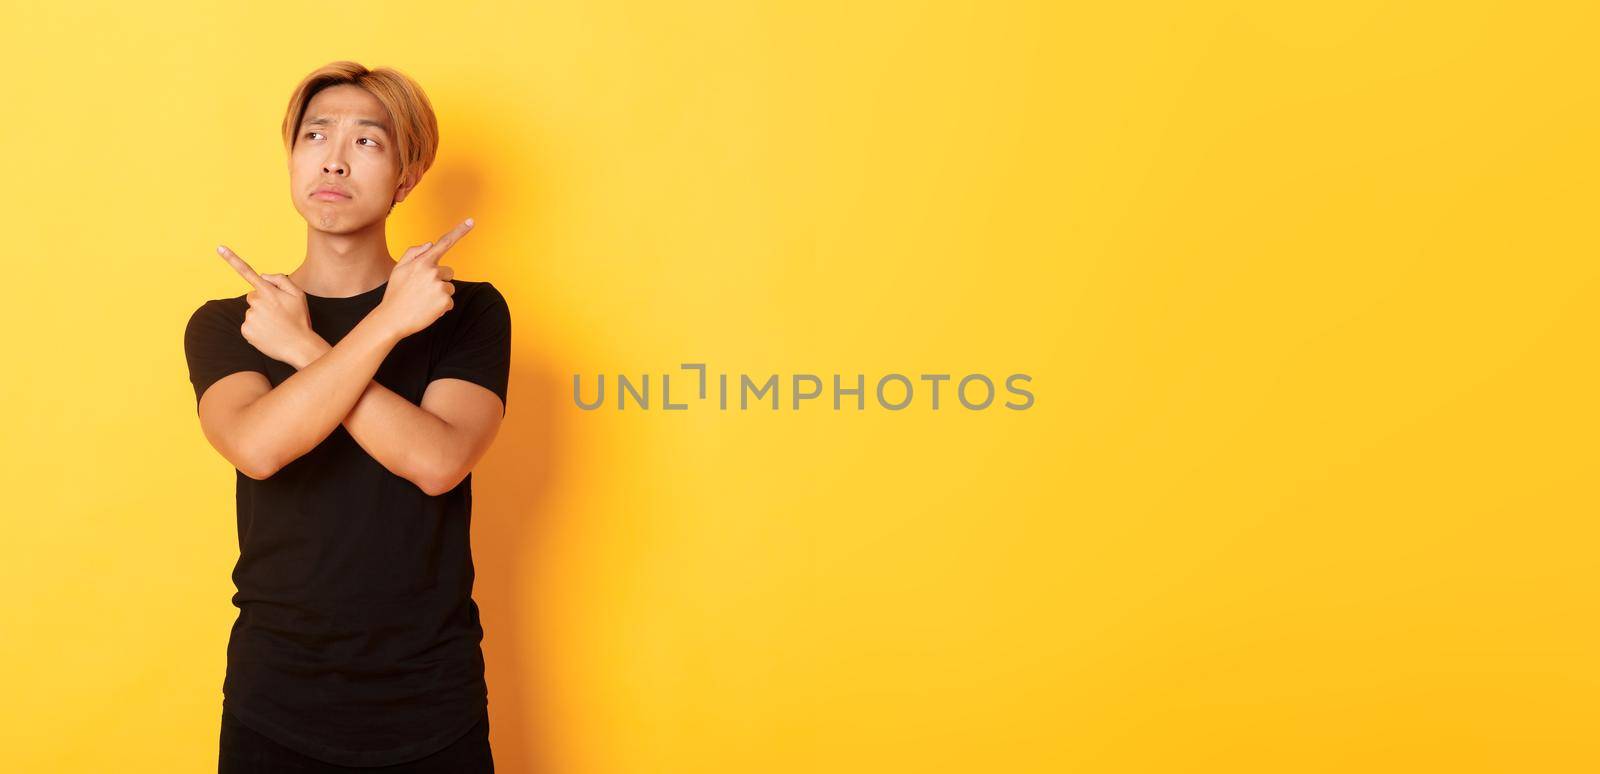 Indecisive handsome asian guy looking confused, pointing fingers sideways, standing yellow background.